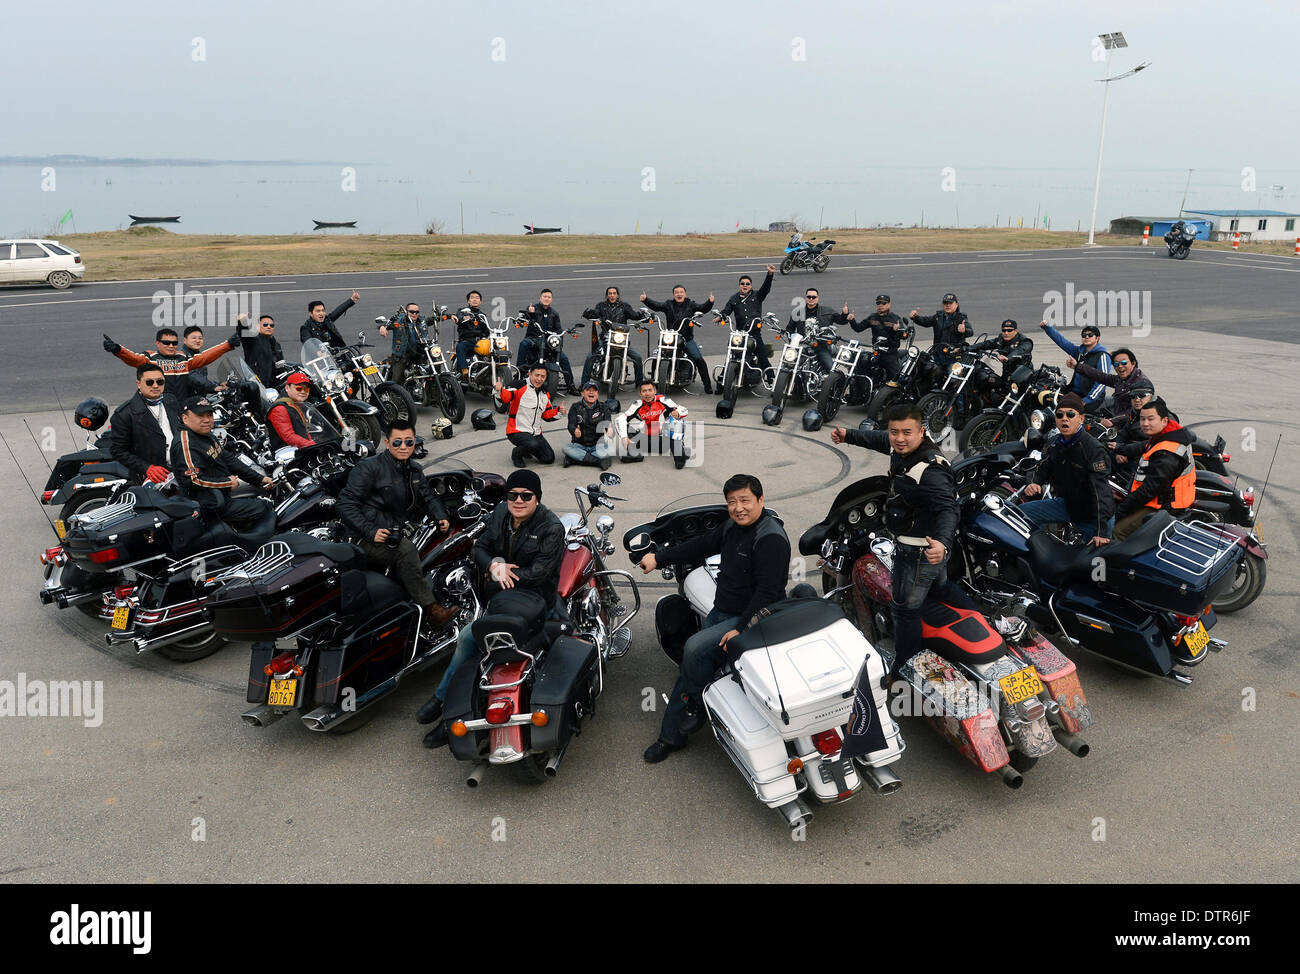 Wuhan, China's Hubei province. 22nd Feb, 2014. Fans of Harley-Davidson motorbikes participate in a weekend tour in Wuhan City, capital of central China's Hubei province, Feb. 22, 2014. © Zhou Chao/Xinhua/Alamy Live News Stock Photo